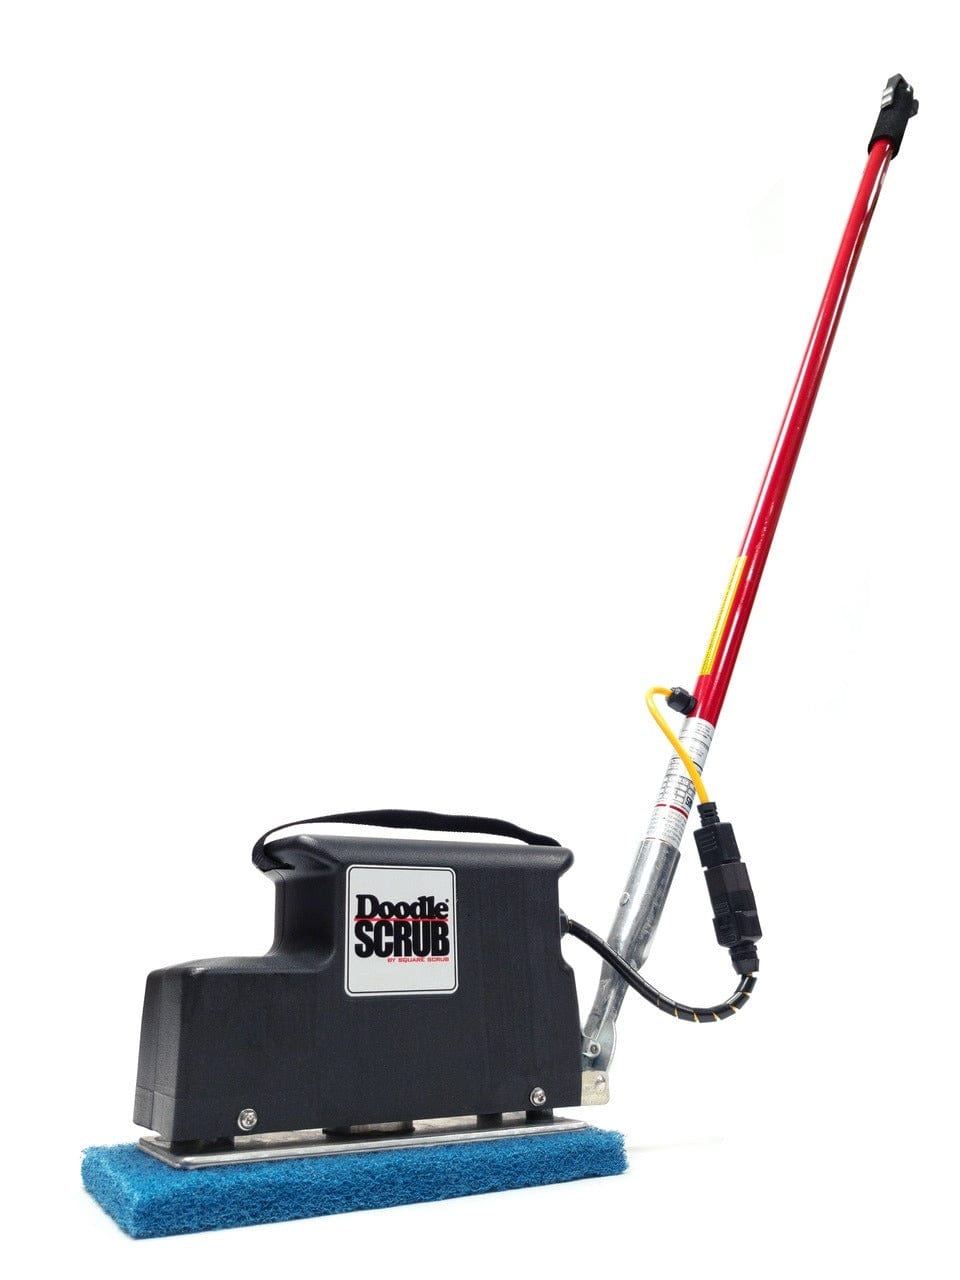 Doodle Scrub Floor Scrubber - Xtreme Polishing Systems - concrete cleaning machine, commercial concrete floor cleaner, commercial concrete scrubber